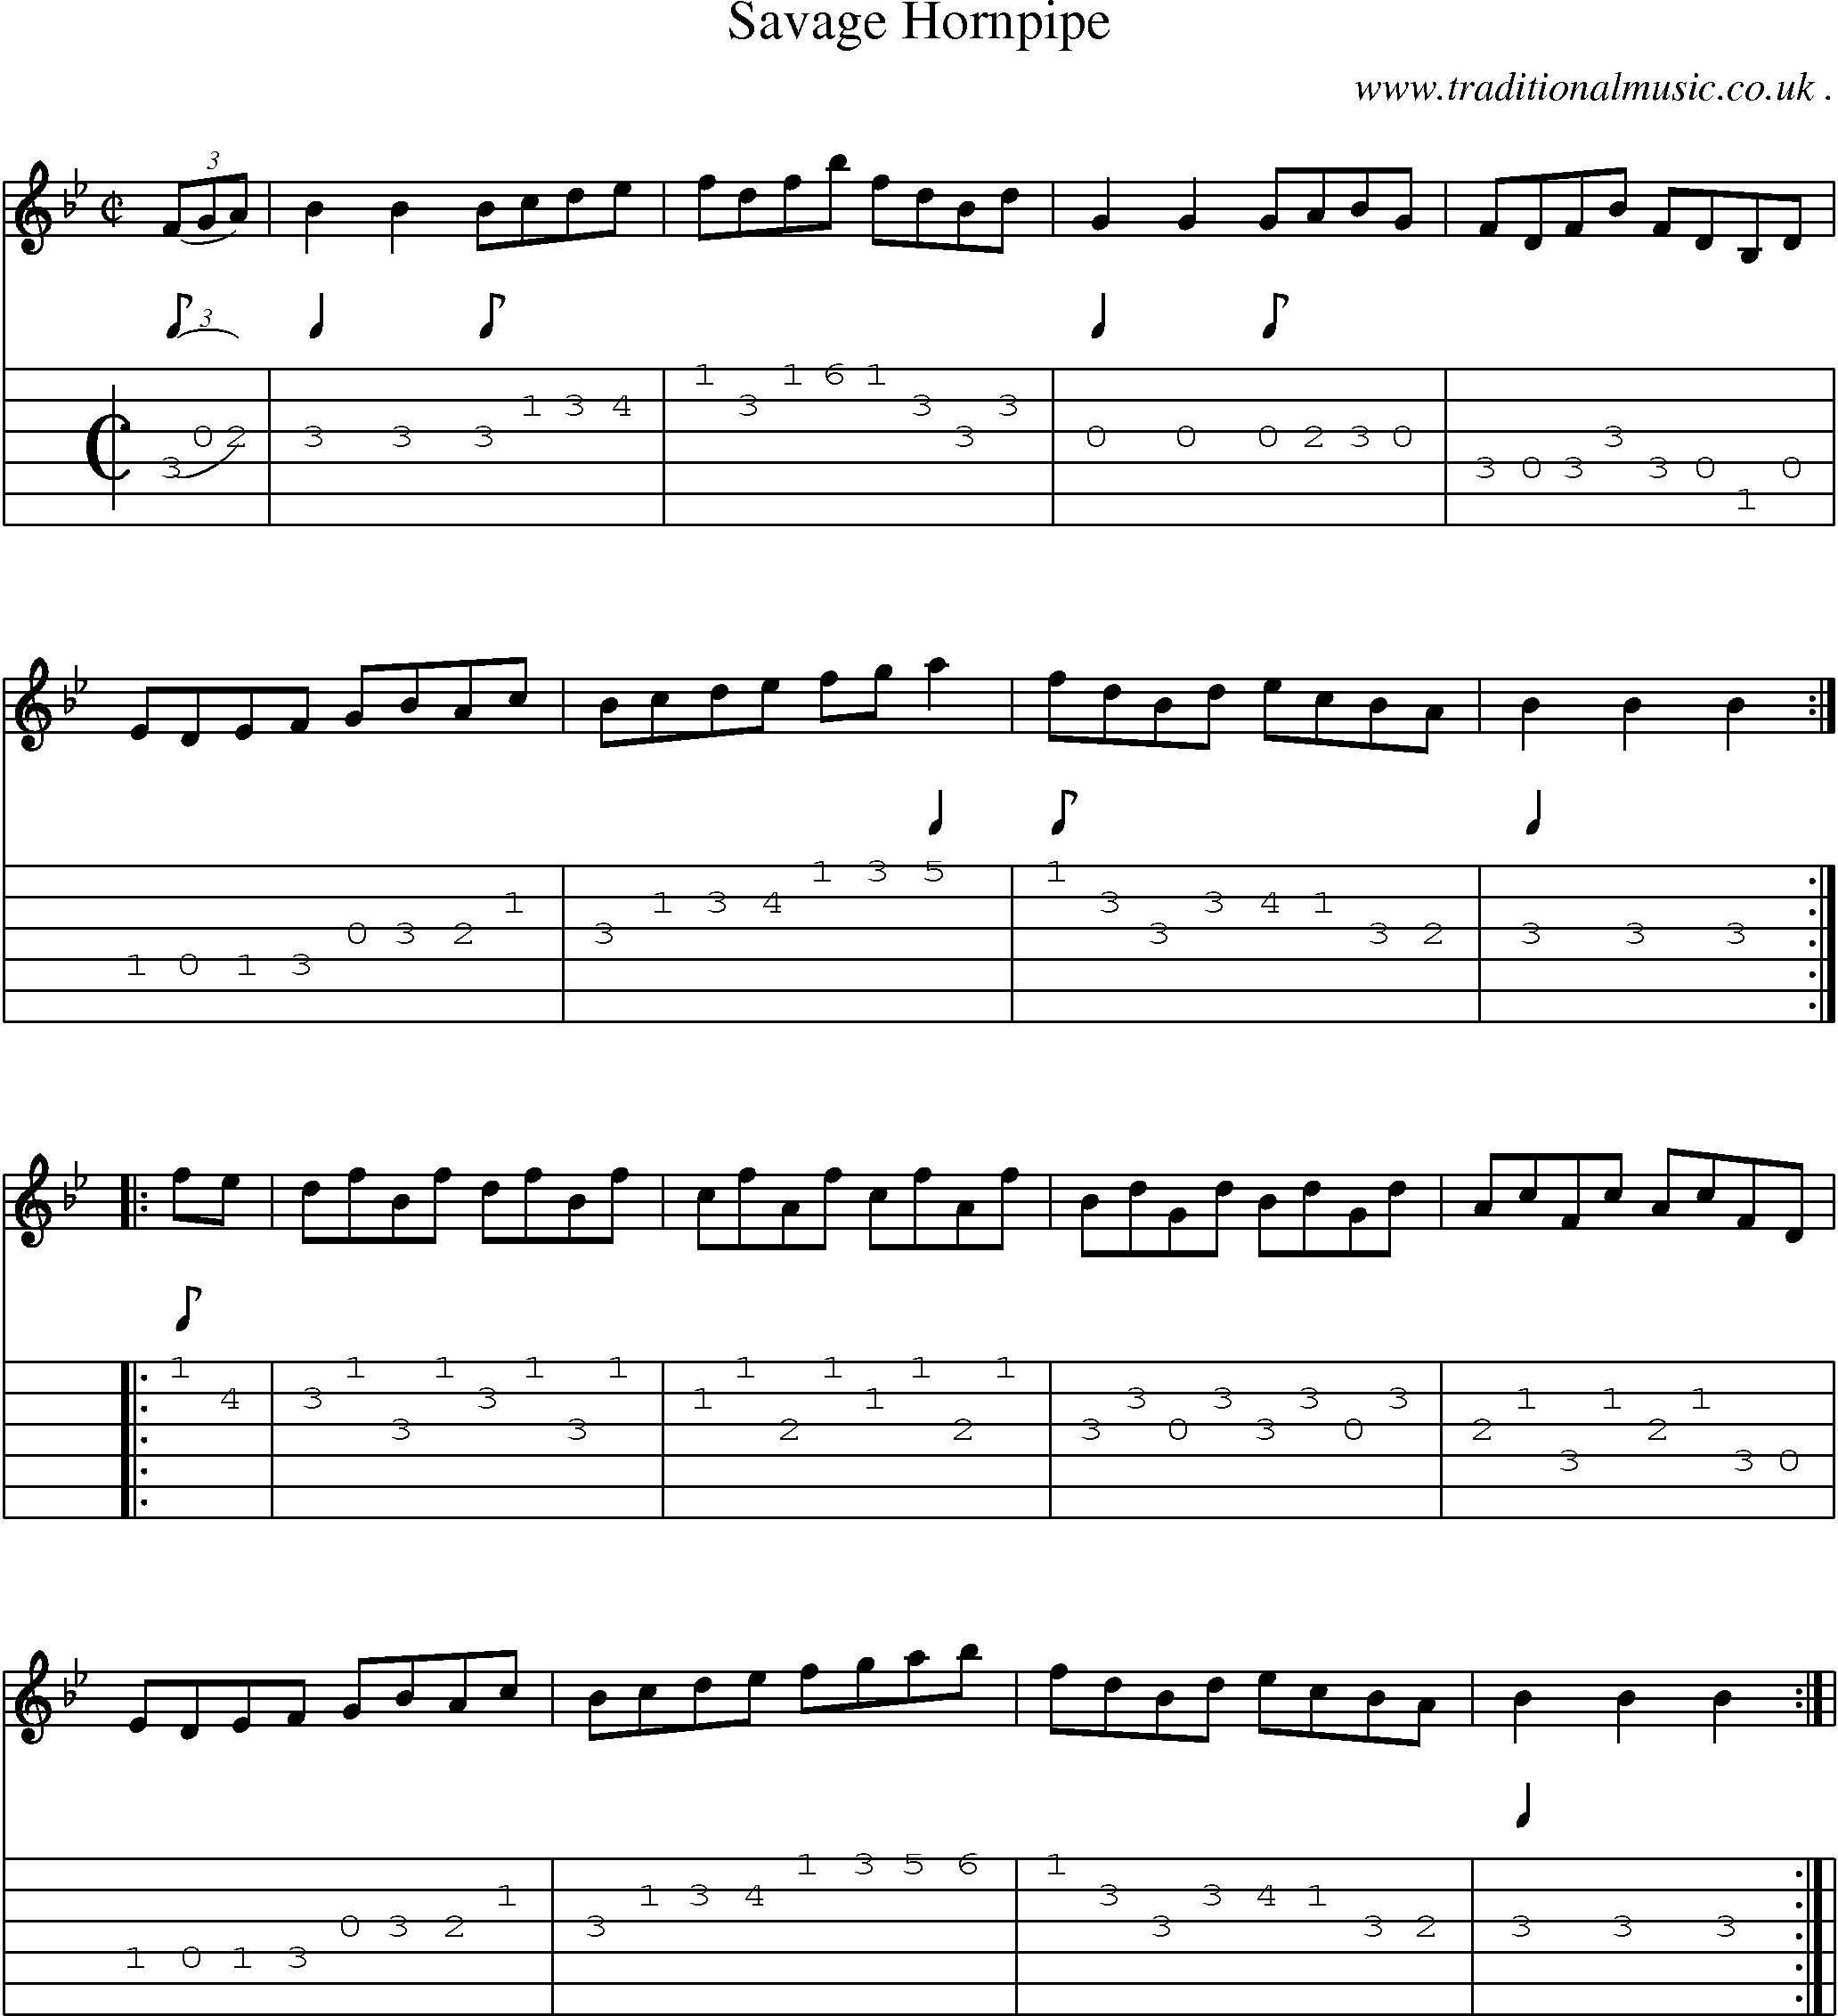 Sheet-Music and Guitar Tabs for Savage Hornpipe